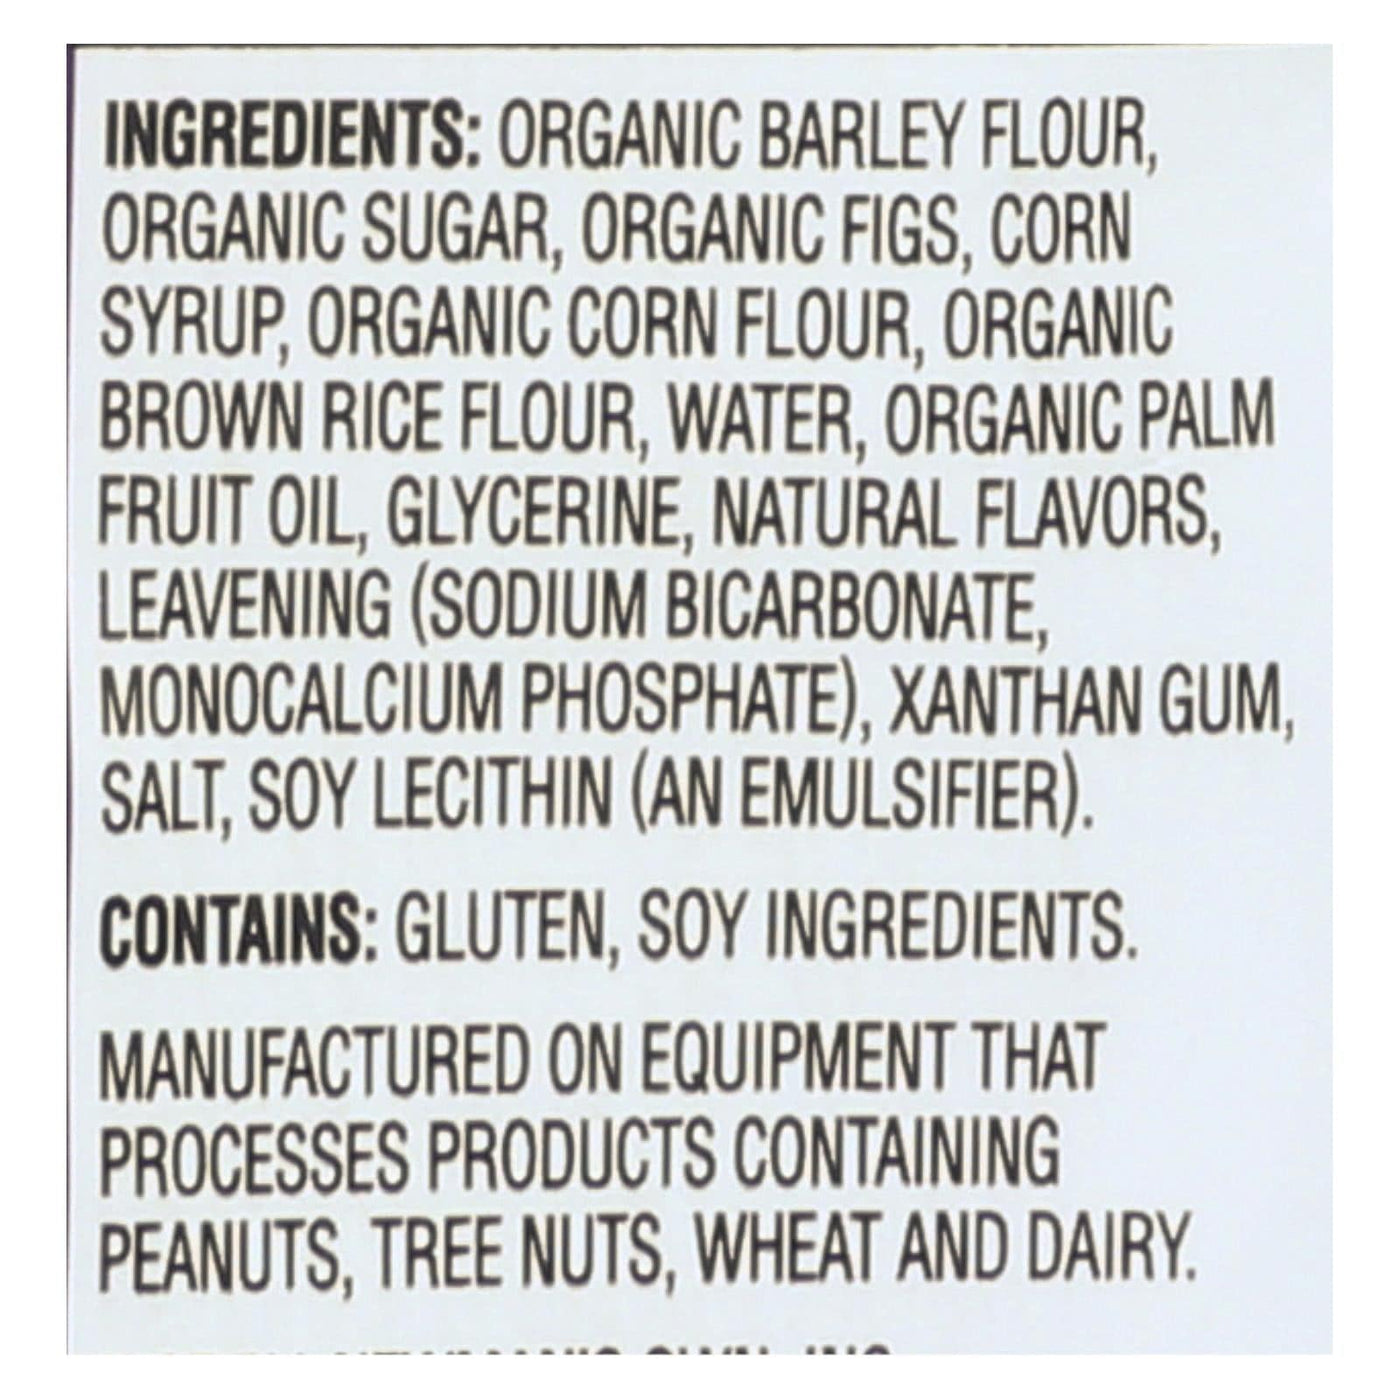 Buy Newman's Own Organics Fig Newman's Wheat Free - Dairy Free - Case Of 6 - 10 Oz.  at OnlyNaturals.us